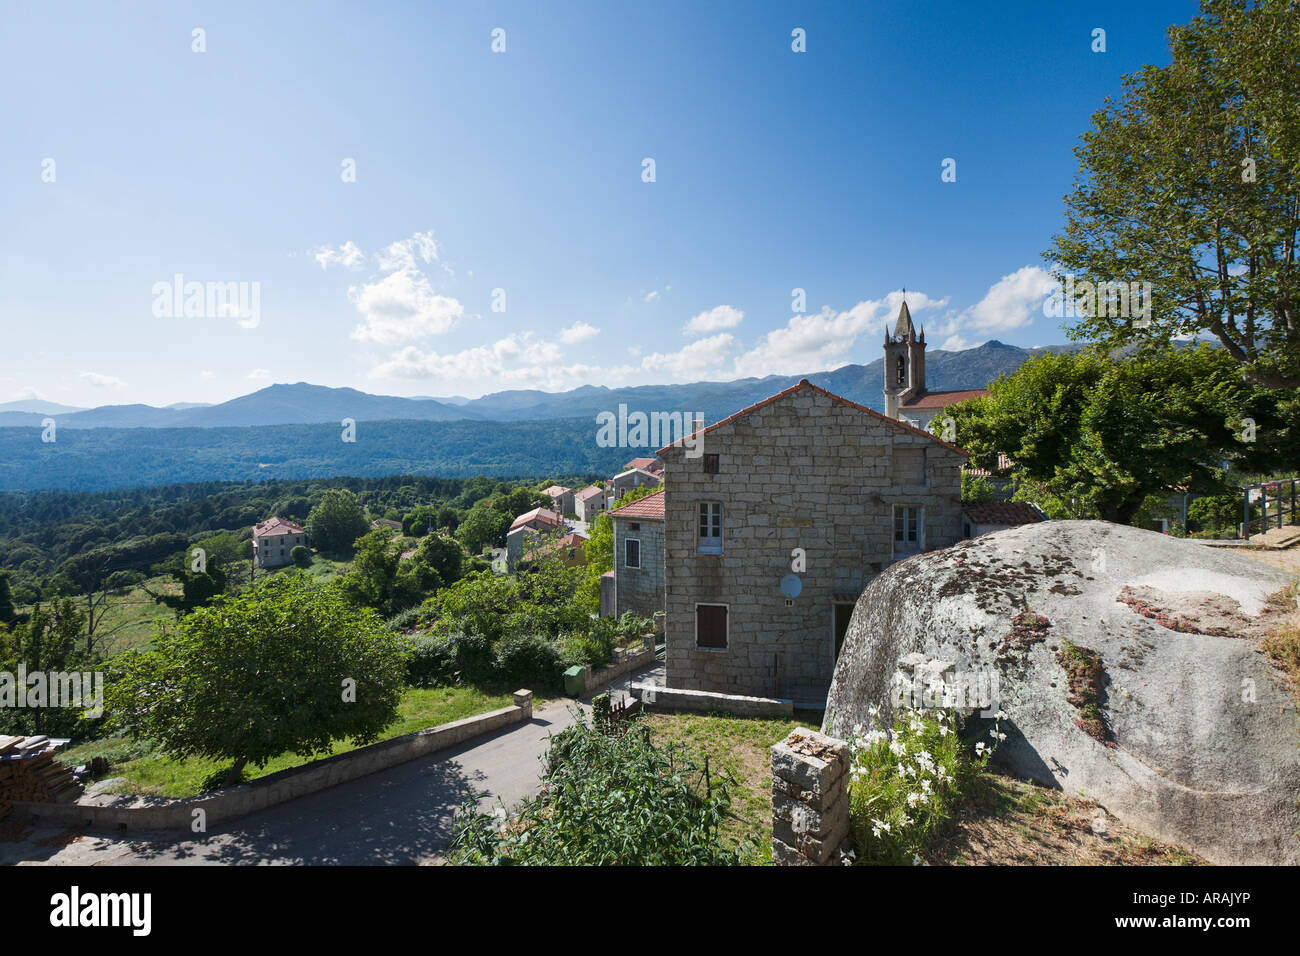 View from the mountain village of Zonza, Alta Rocca, Corsica, France Stock Photo